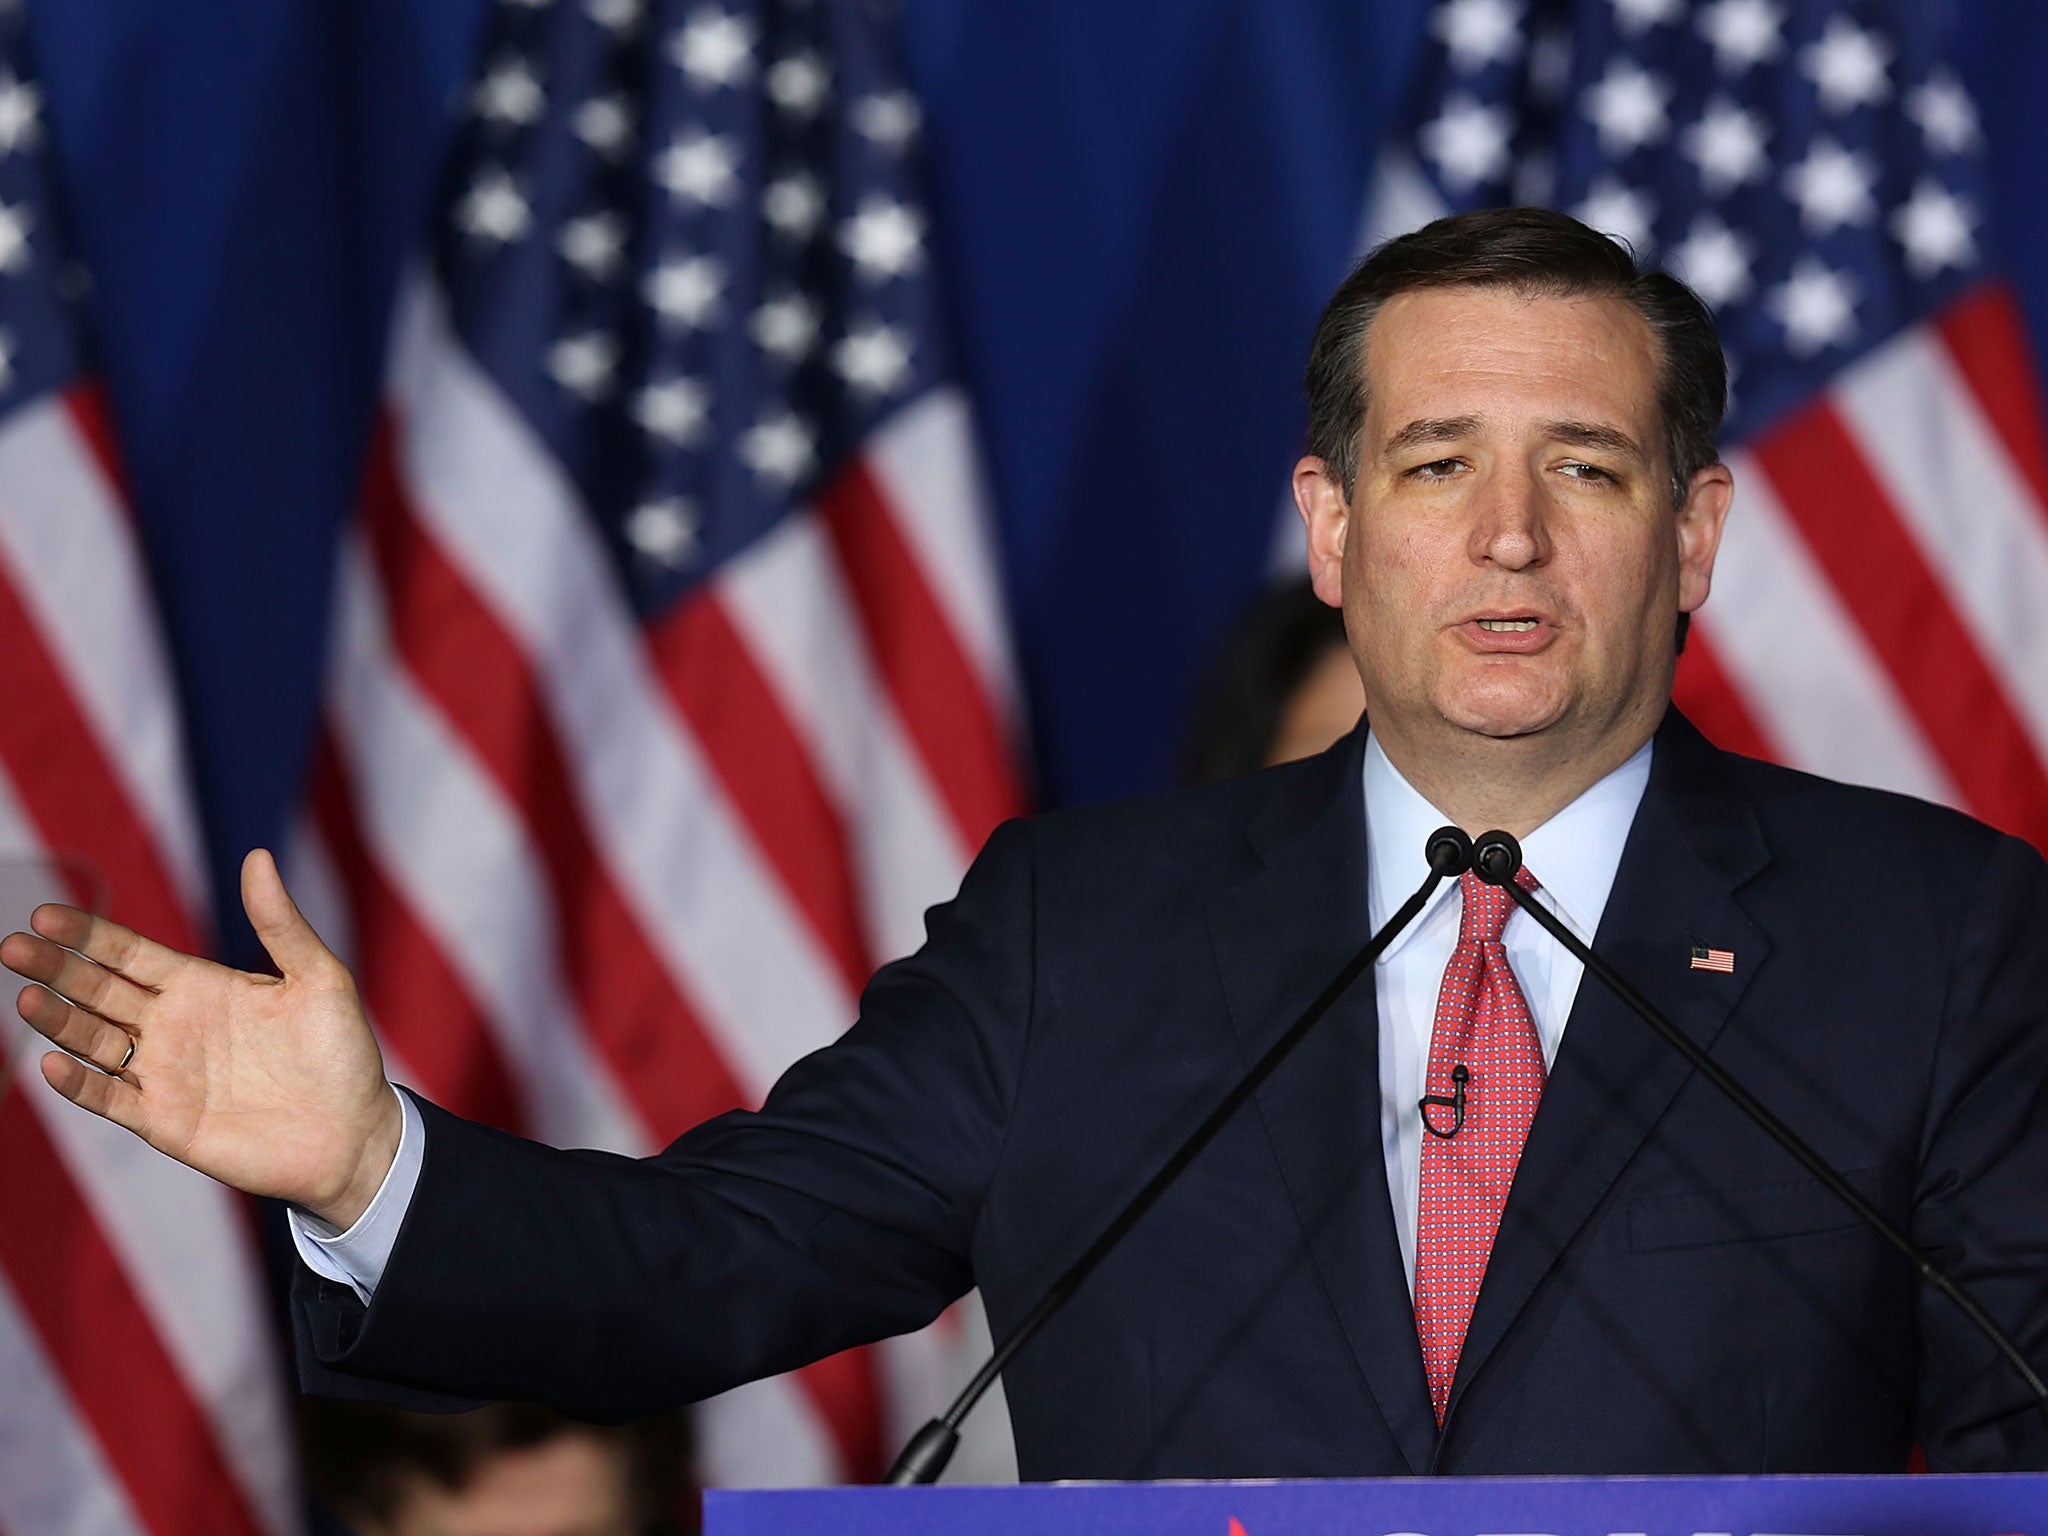 Ted Cruz announces he is ending his bid for the Republican presidential nomination after defeat in Indiana